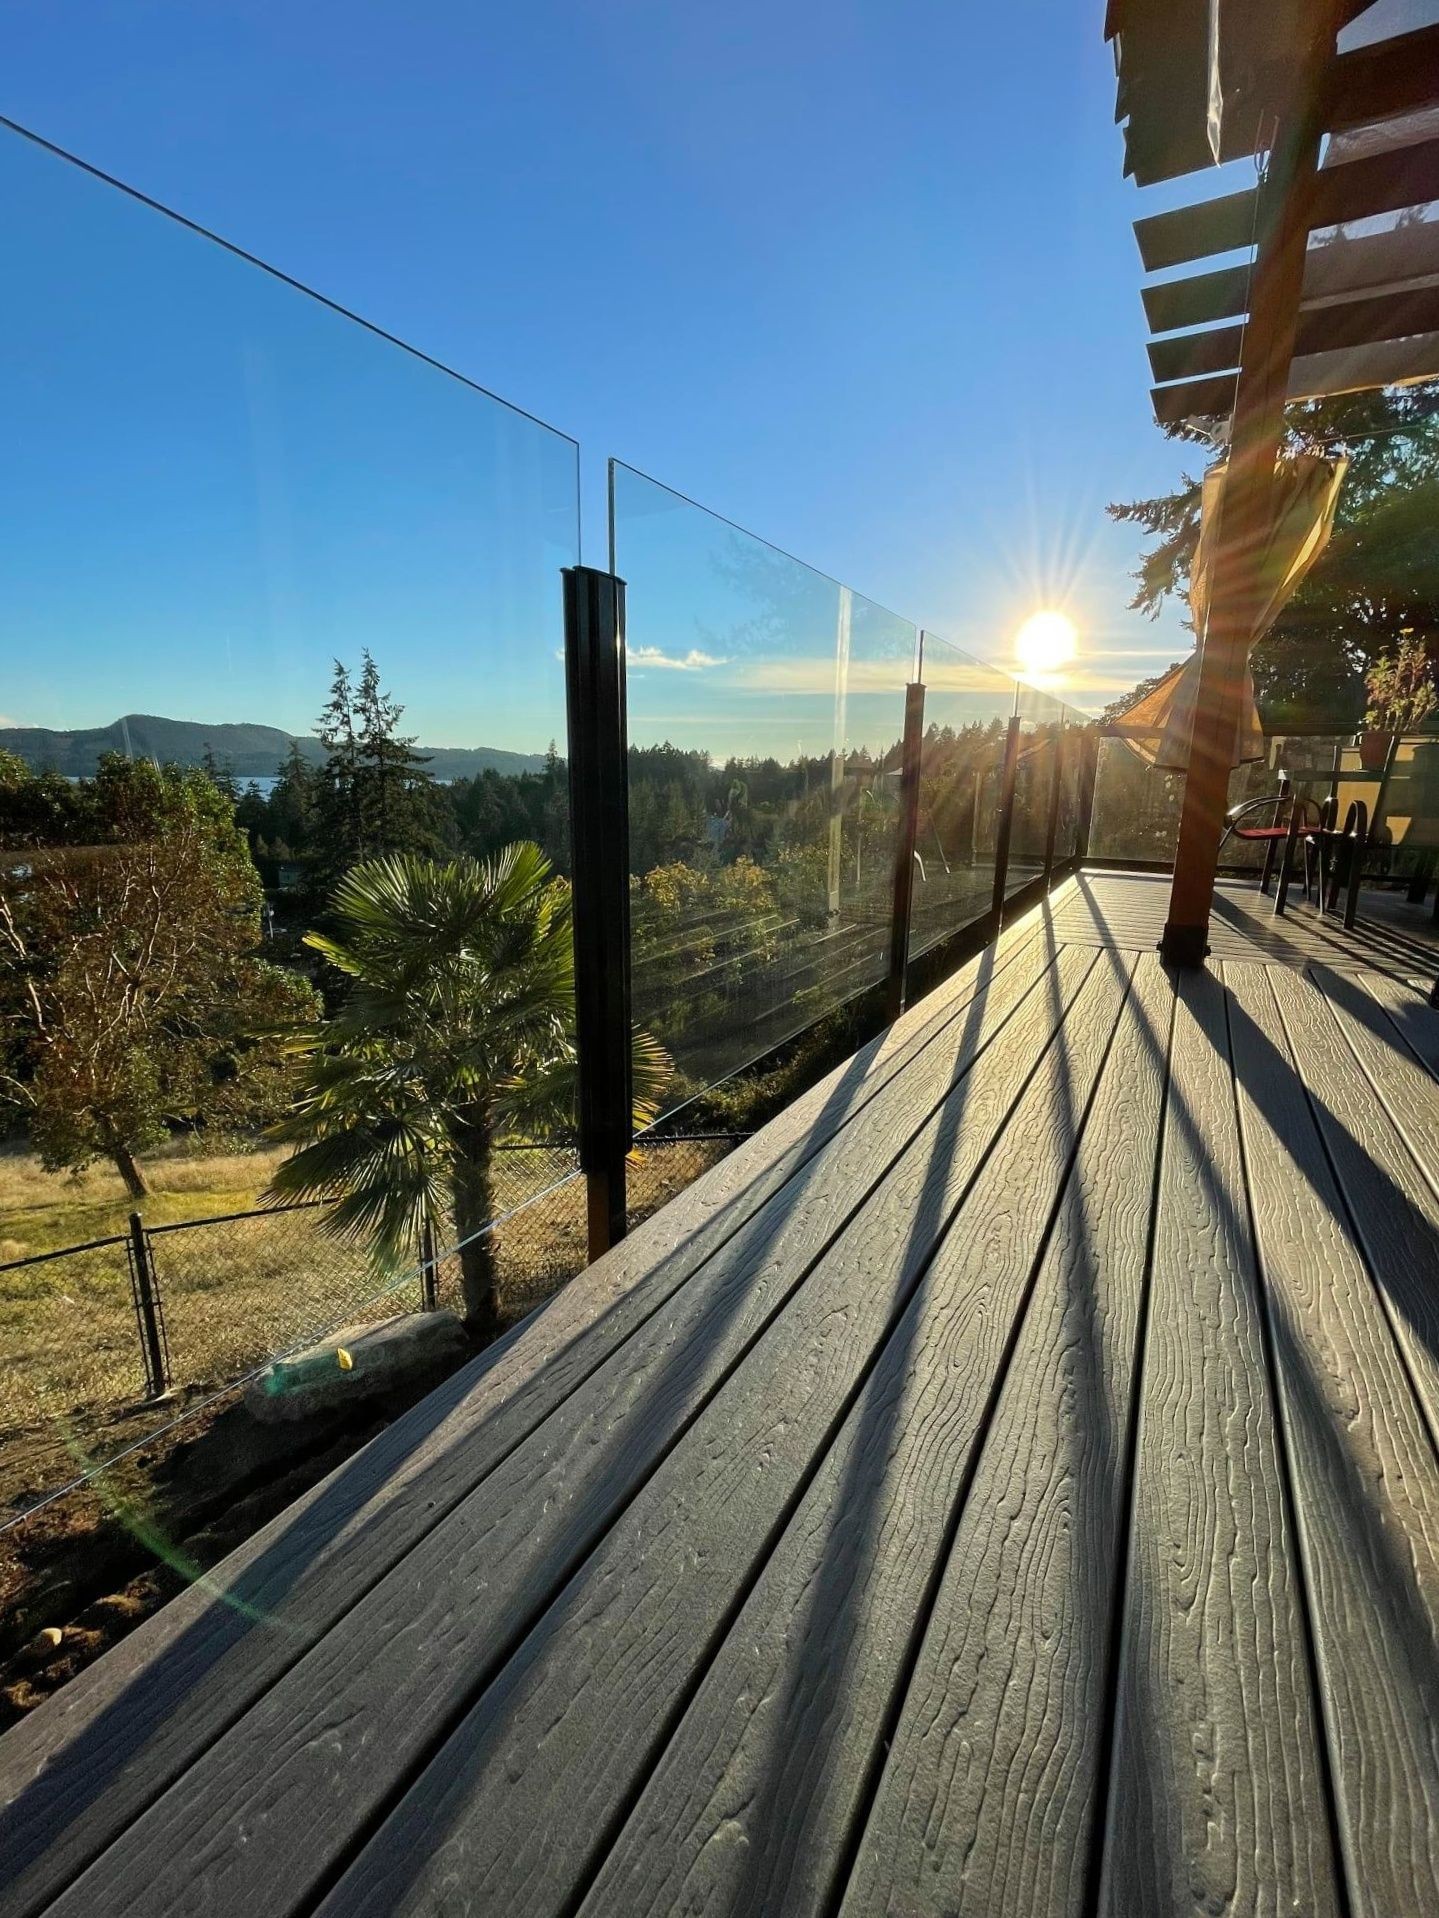 Gray composite deck with glass railings casting shadows across the deck.